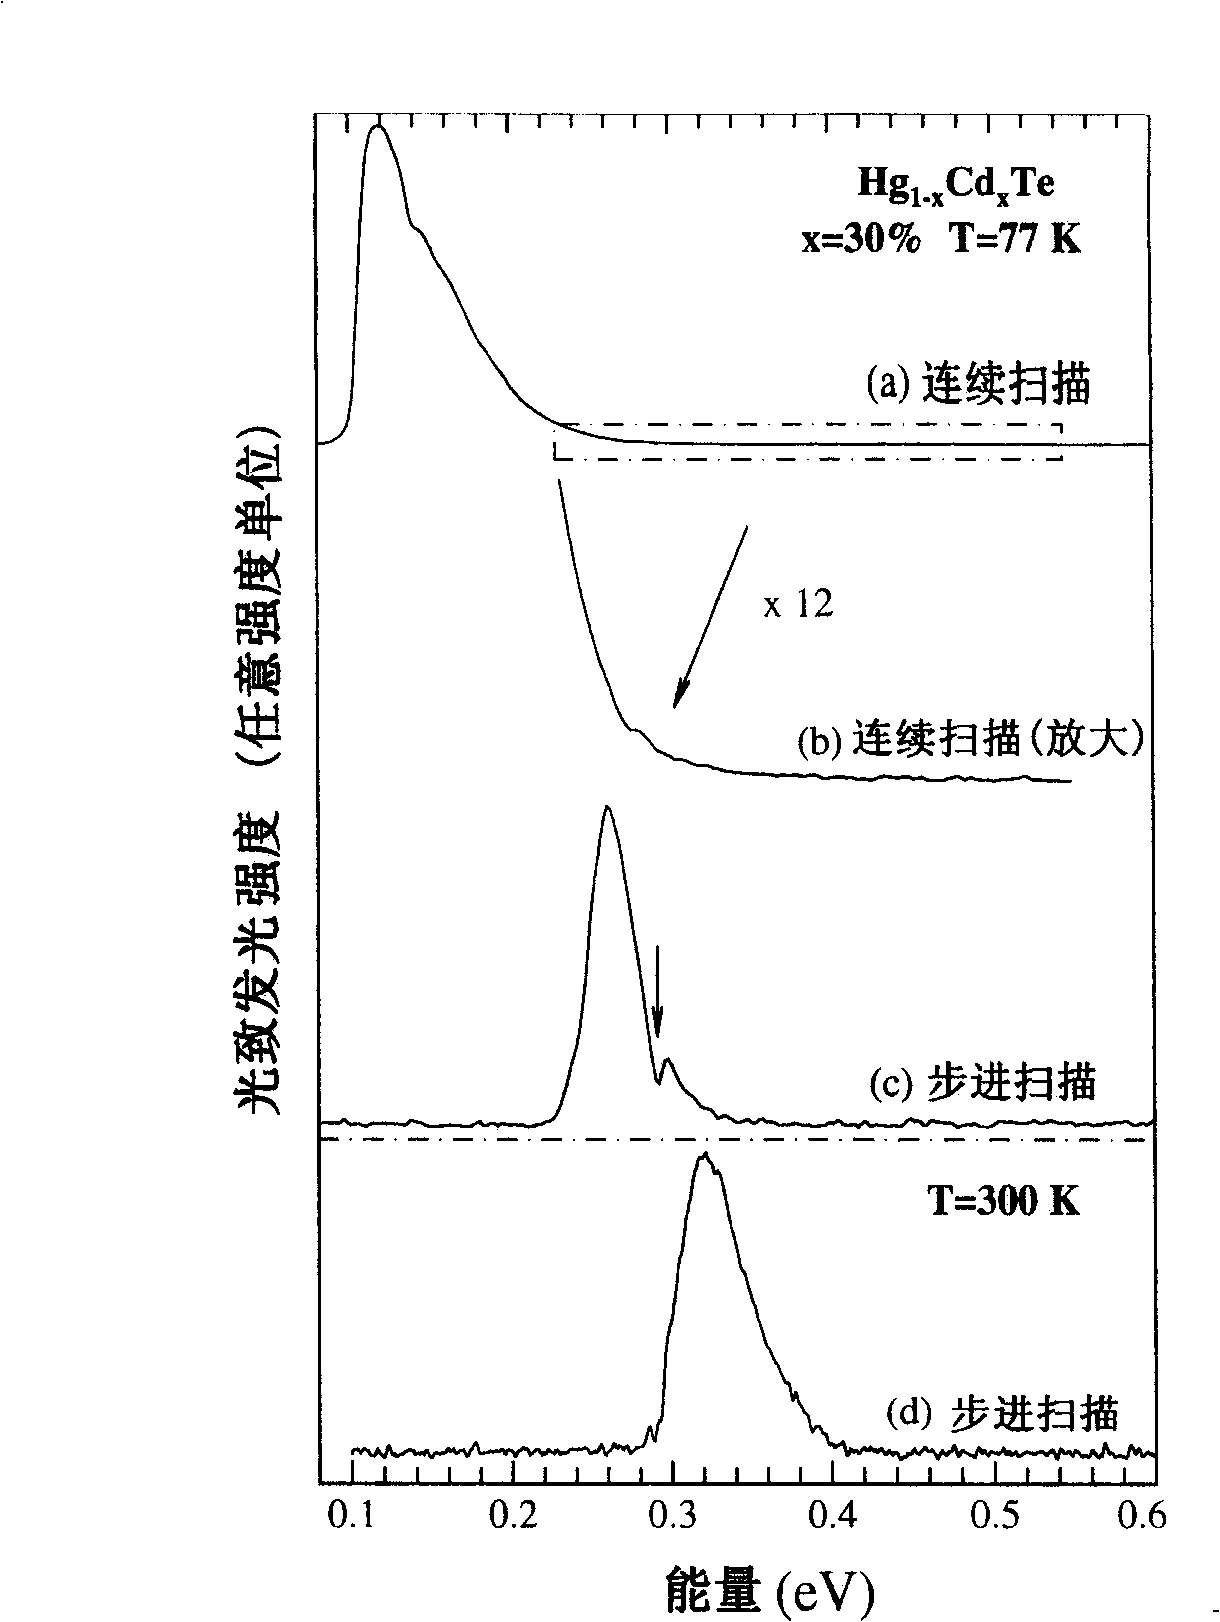 Infrared-modulated photoluminescence spectrum measuring method and apparatus based on step scan